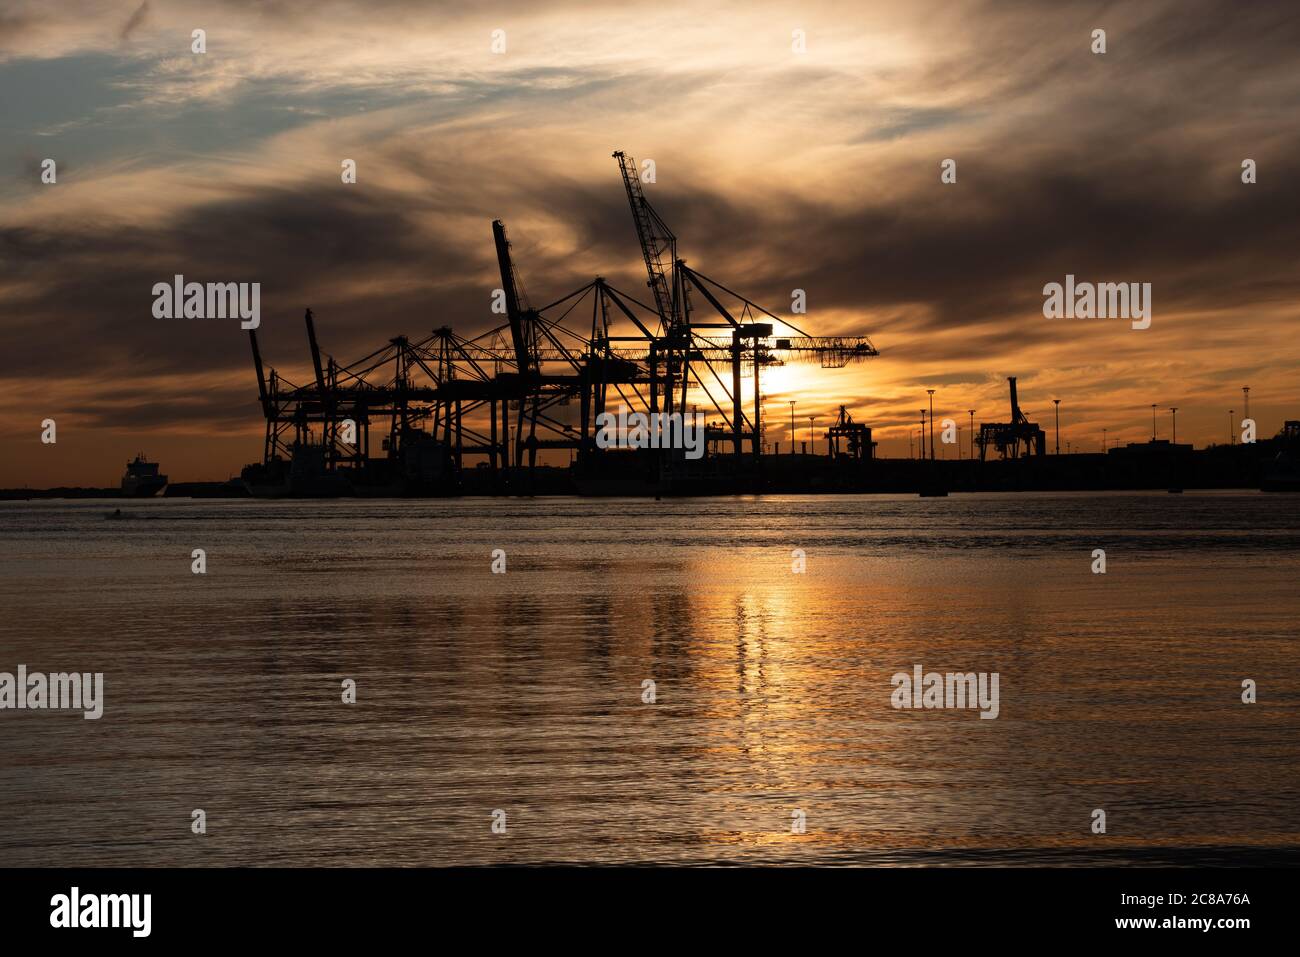 Silhouettes of ship to shore cranes at sunset.. Stock Photo